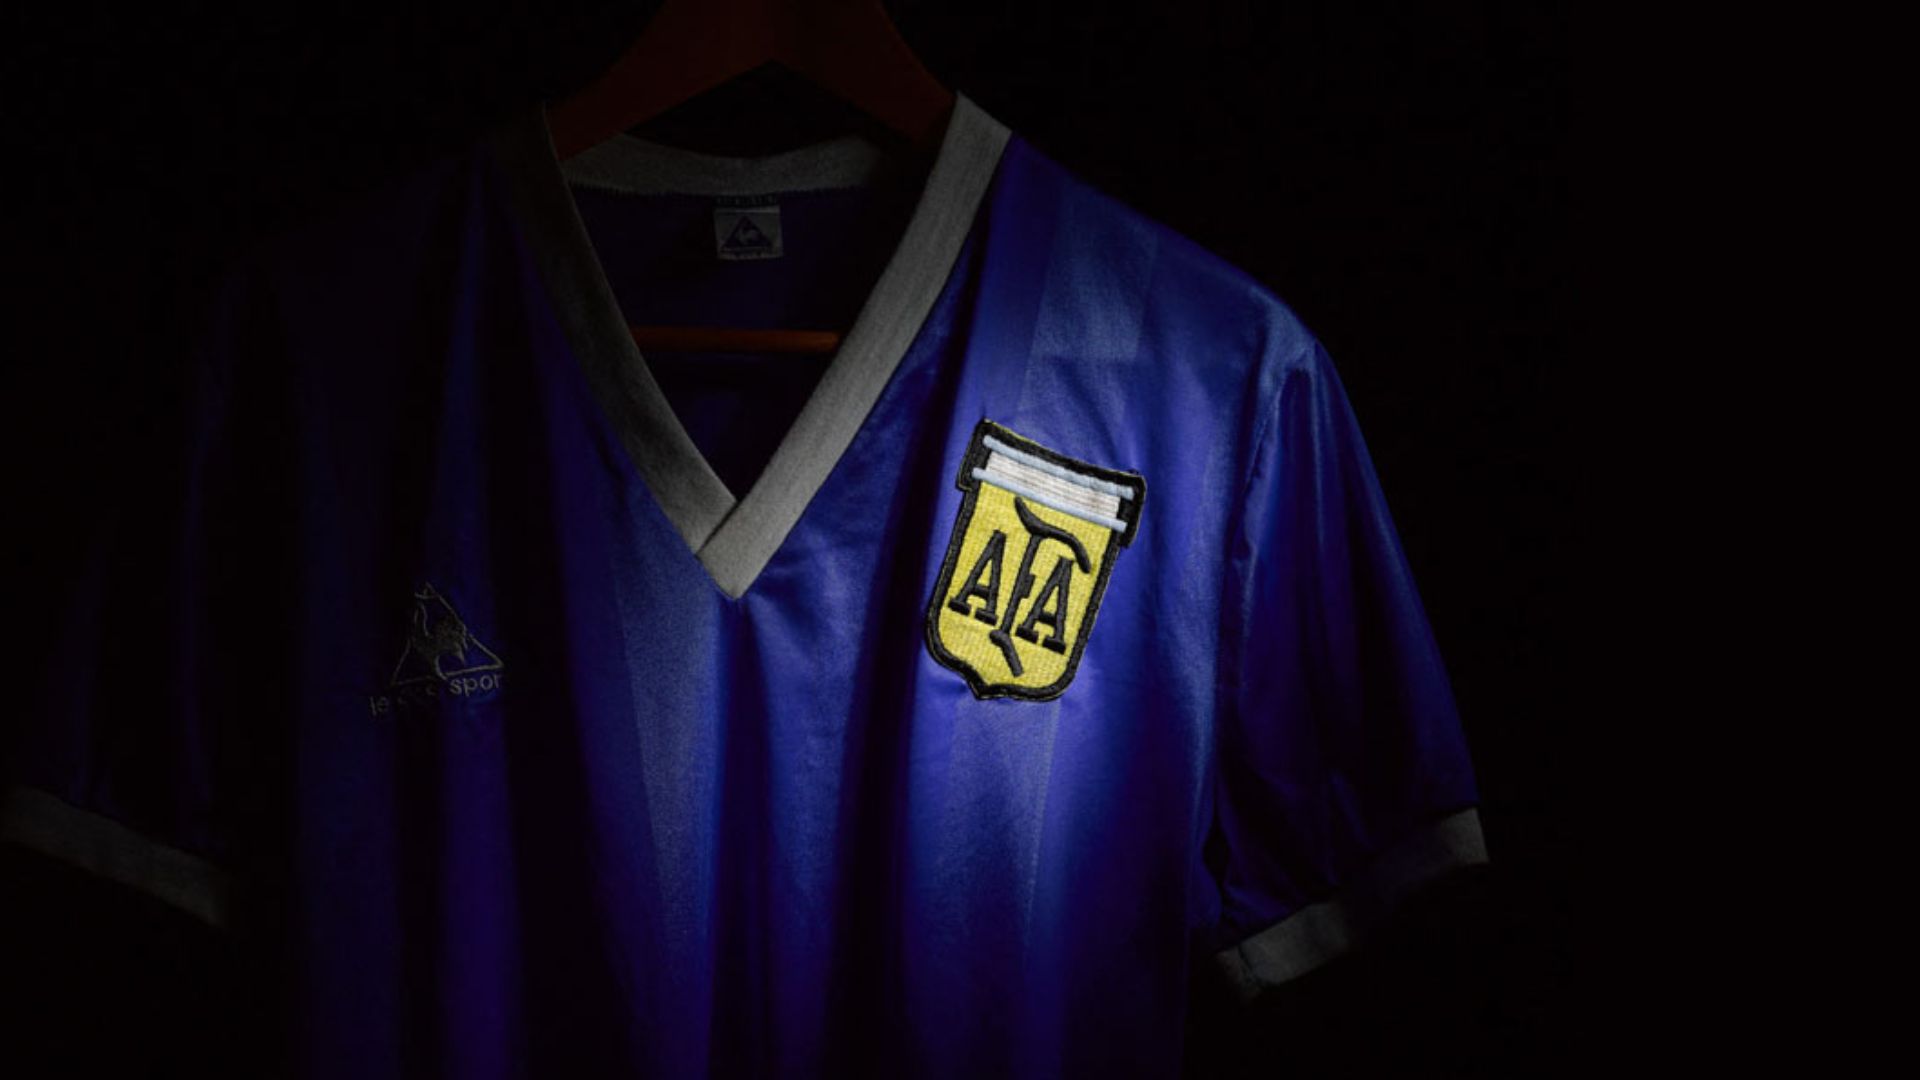 Maradonas World Cup jersey sells for R144 million at auction